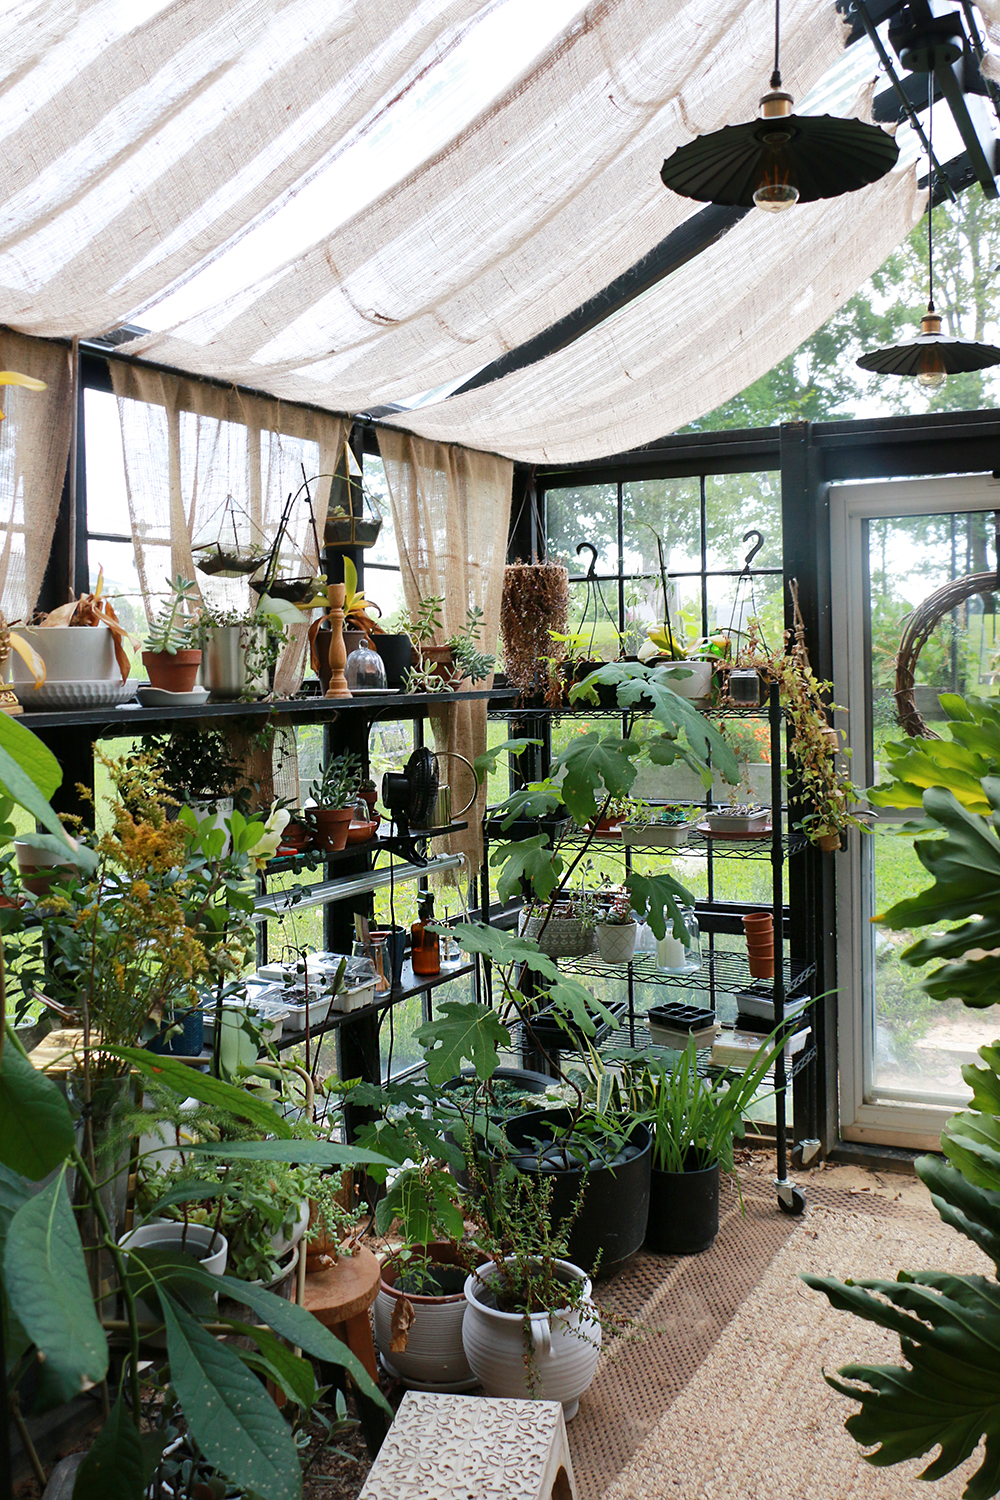 15 Greenhouse Decorating Ideas That Add